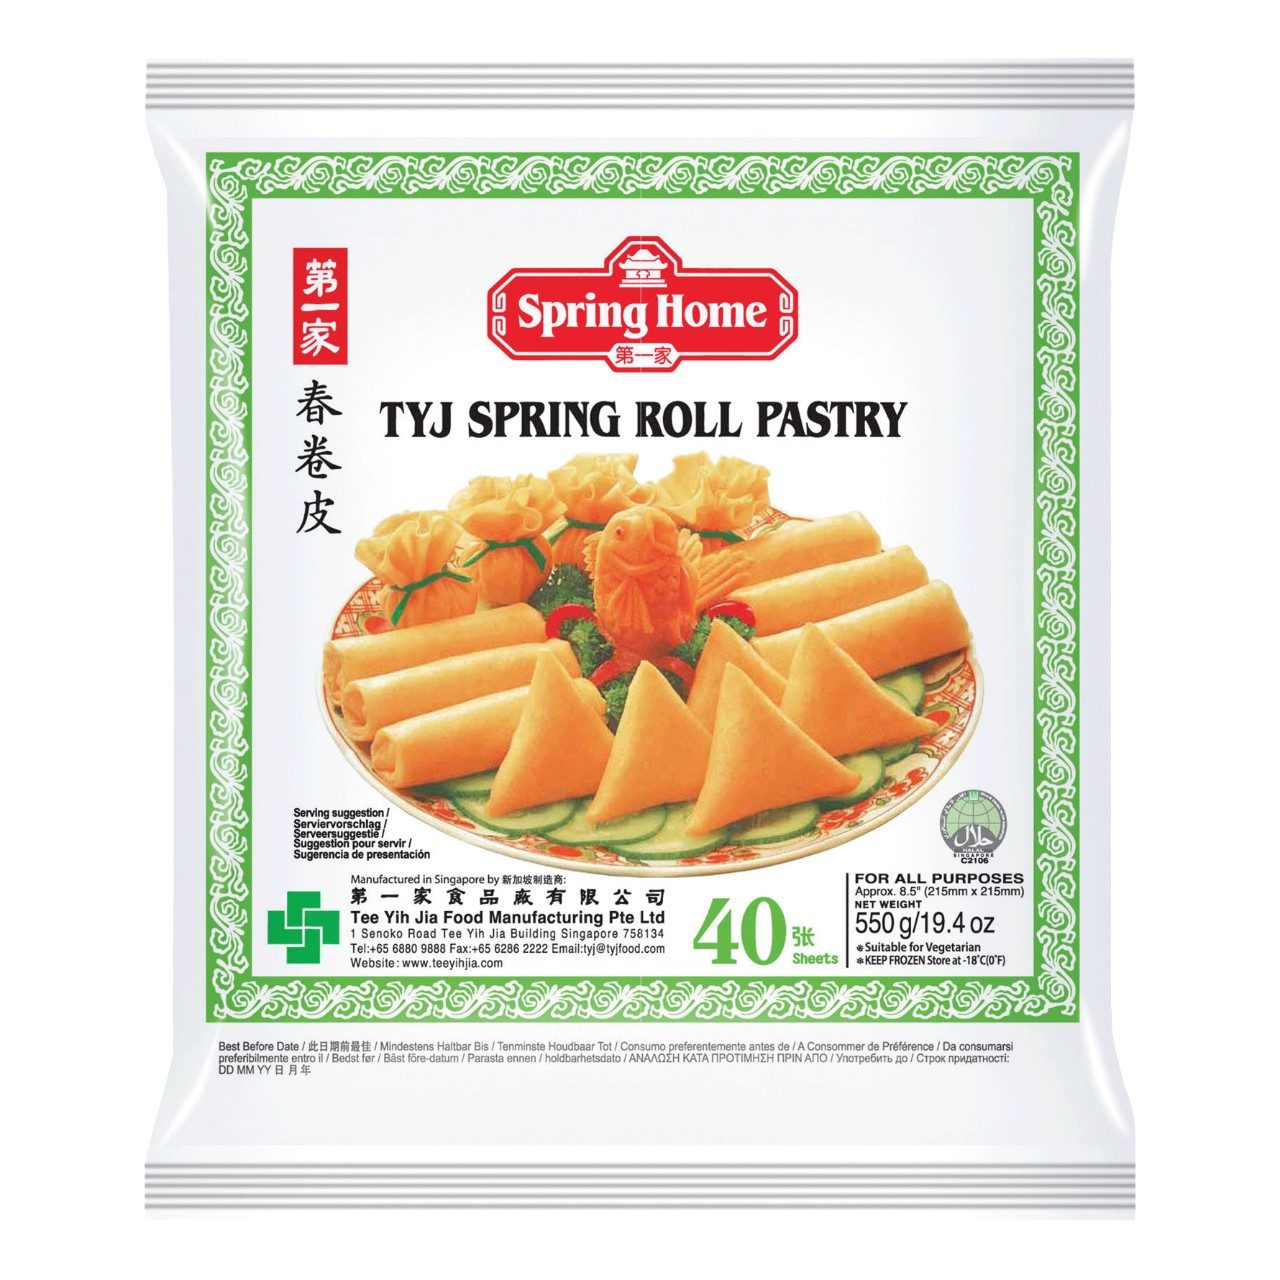 Tyj spring roll pastry